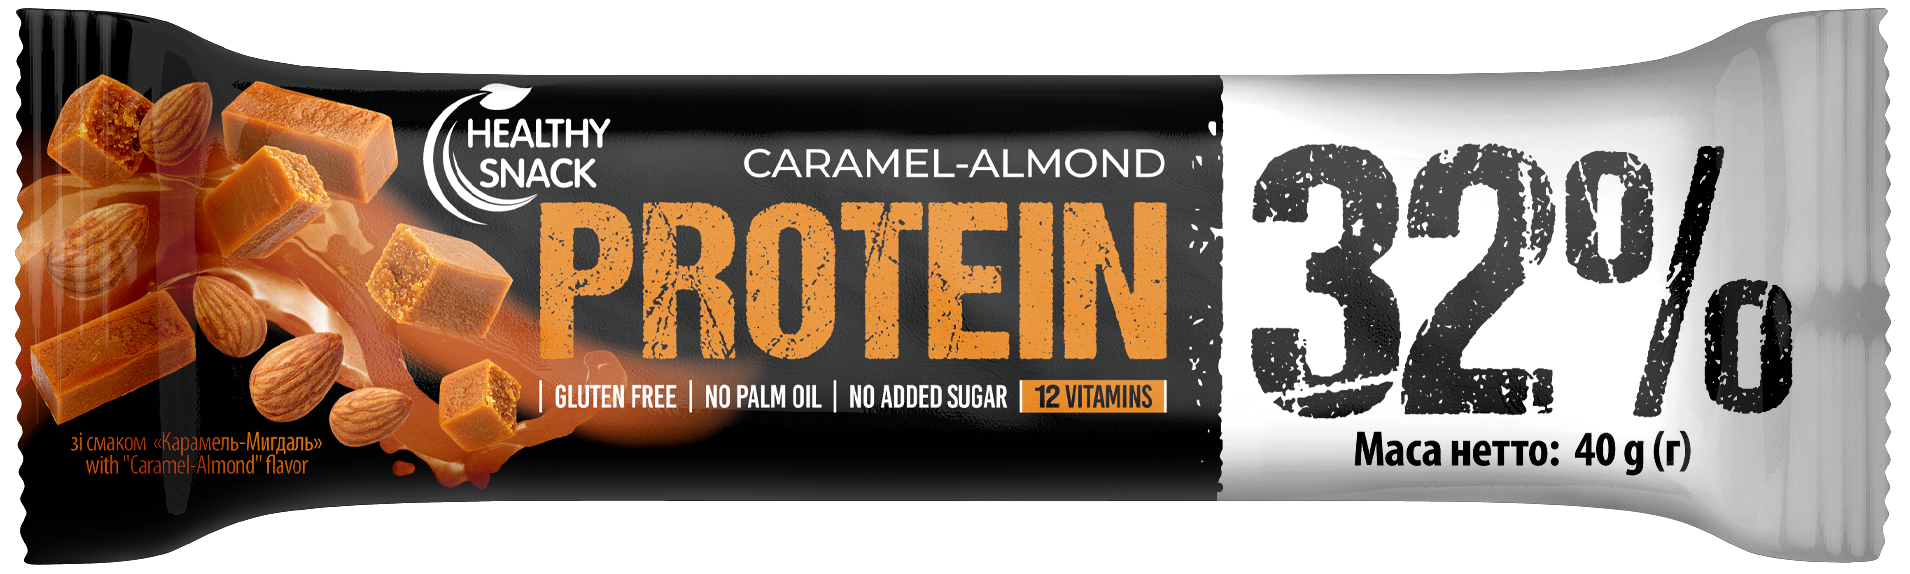 Protein bar for sports nutrition with Caramel-Almond flavor, glazed